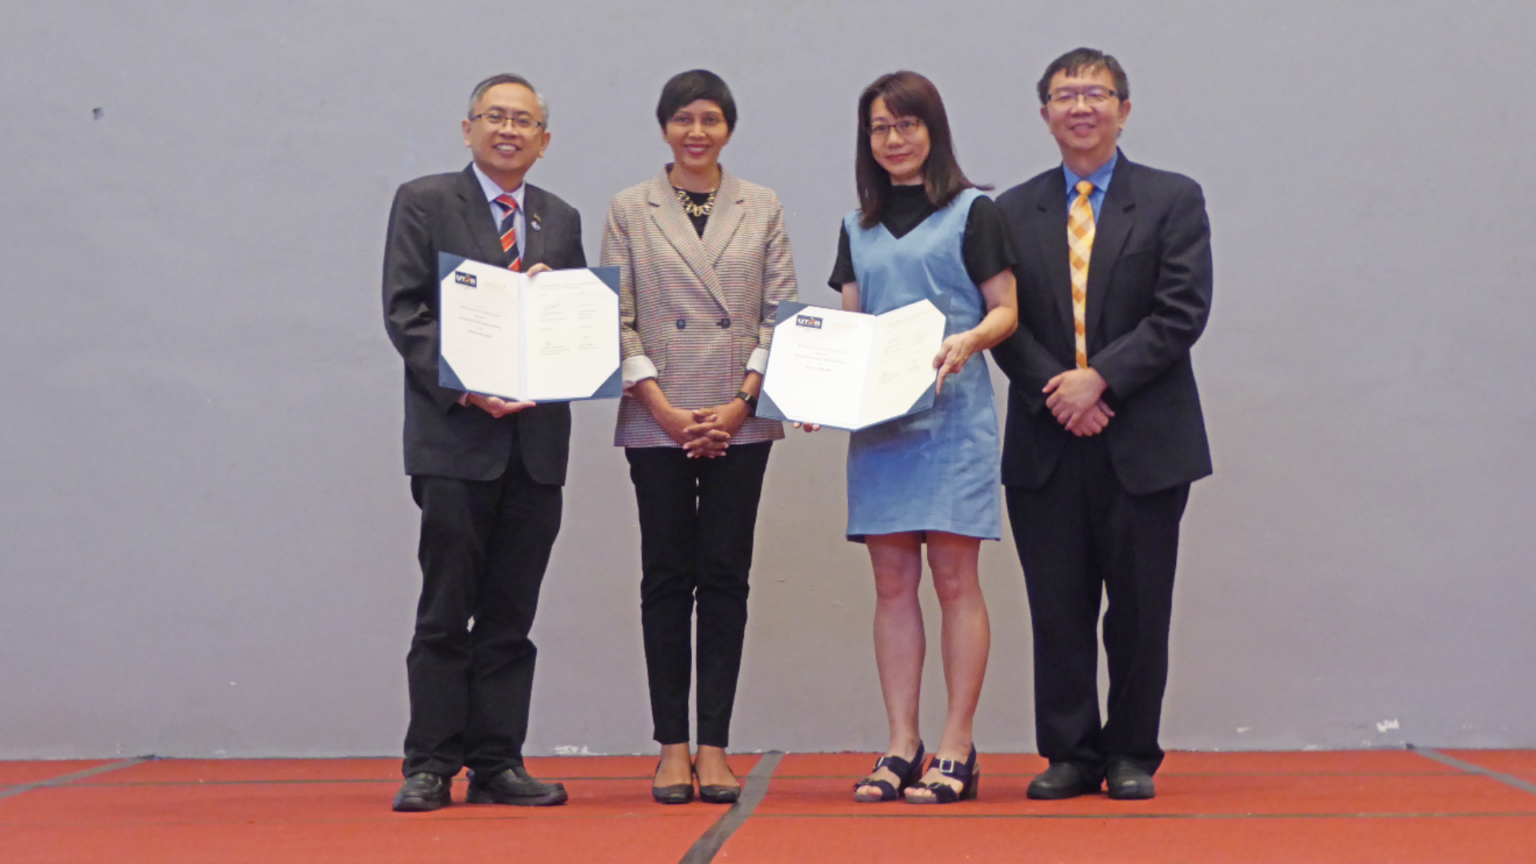 UTAR President Professor Dr Ewe Hong Tat presenting the MoU to Chung Wai Ming, Senior Solution Manager of Finexus in the presence of Dr Sumitra Nair, Vice President of Talent Development and Digital Entrepreneurship of MDEC (Malaysia Digital Economy Corporation) and another UTAR representative